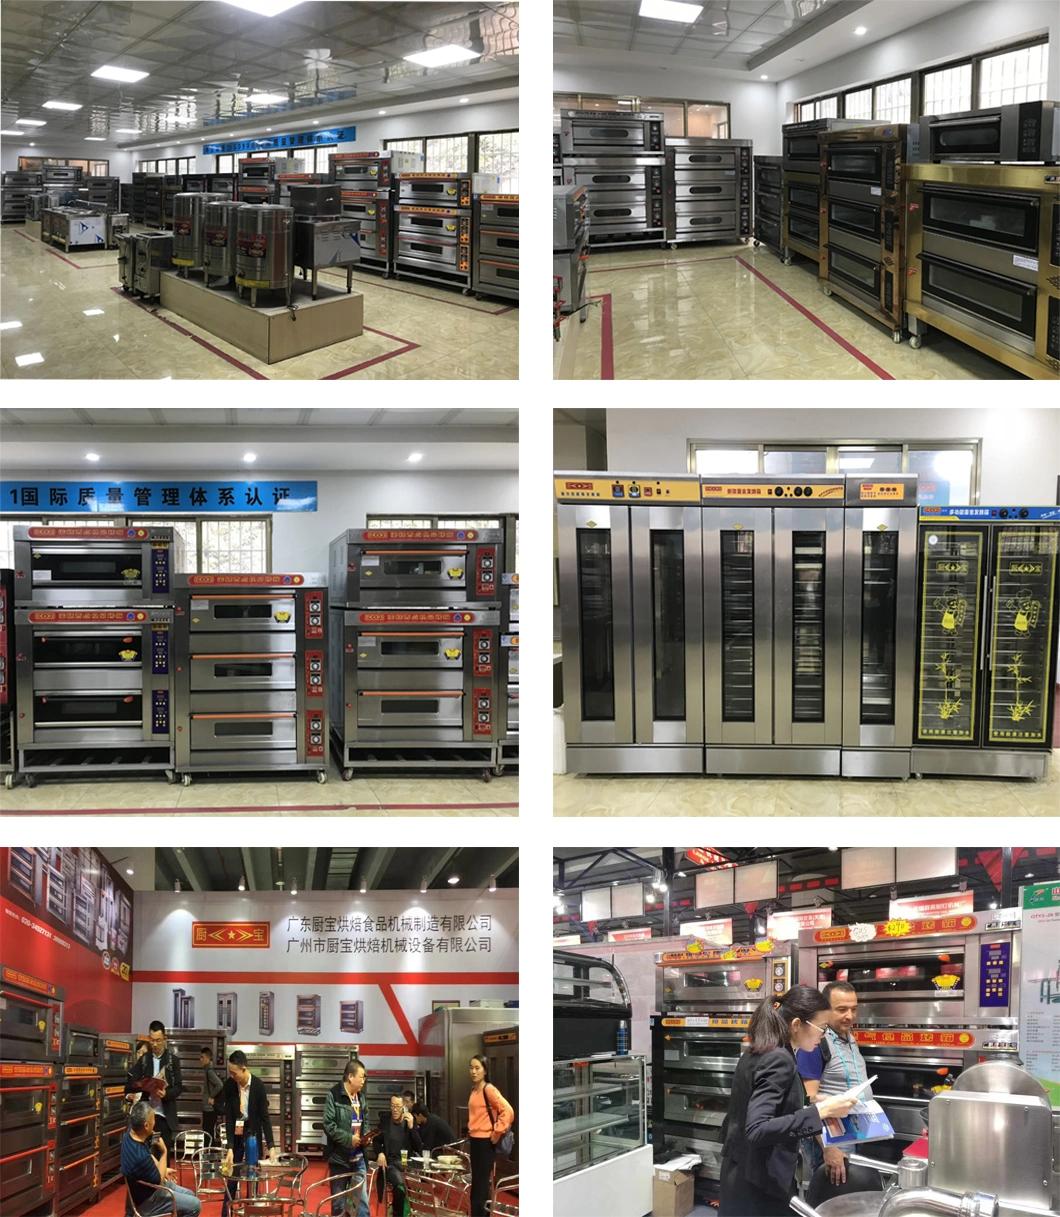 4 Deck 16 Tray Electric Oven for Commercial Kitchen Baking Equipment Bakery Machinery Food Machine